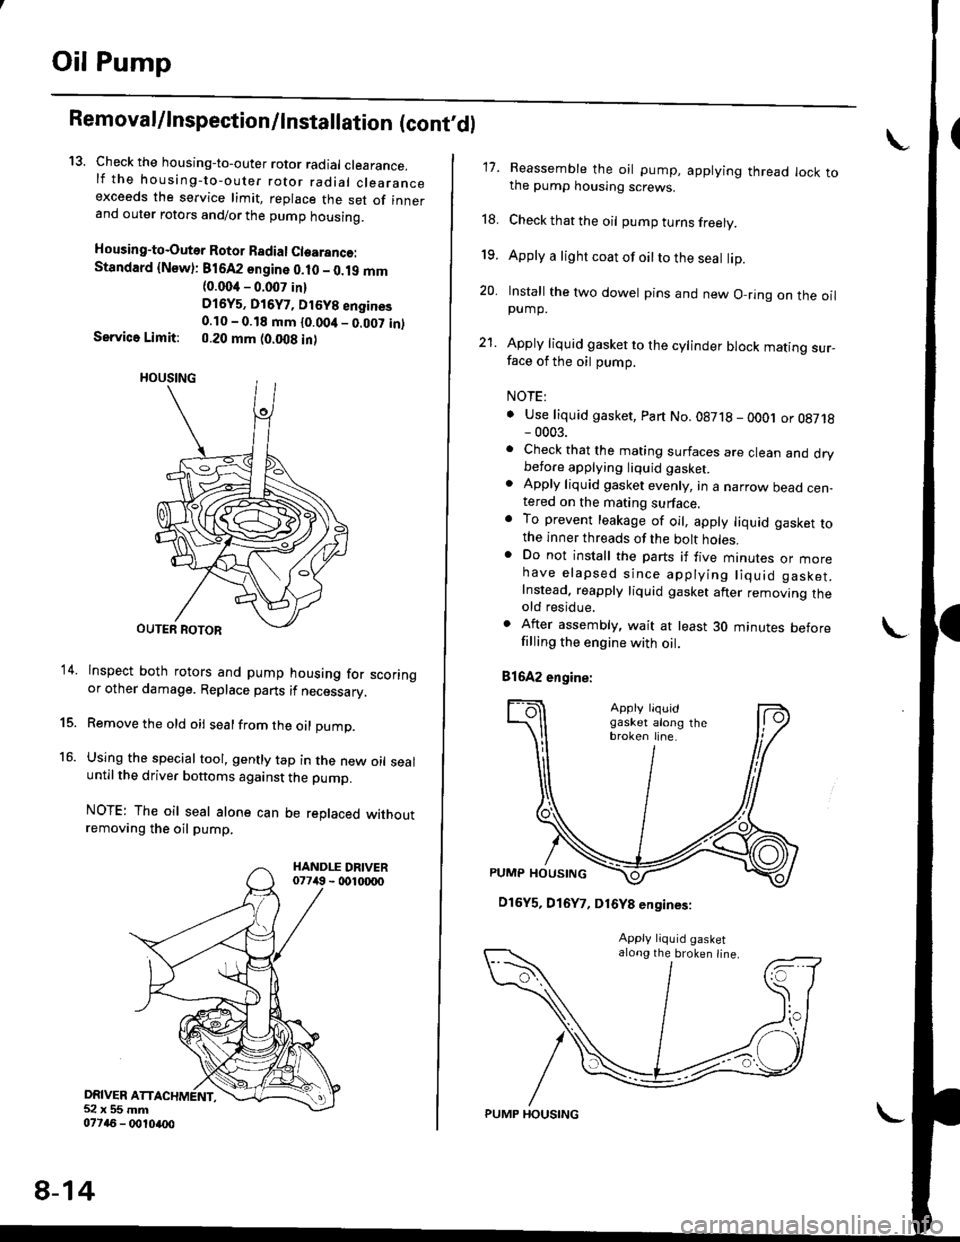 HONDA CIVIC 1997 6.G Workshop Manual Oil Pump
RemovaUlnspection/lnstallation (contdl
13. Check the housing-to-outer rotor radial clearance.lf the housing-to-outer rotor radial clearanceexceeds the service limit, replace the set of inner